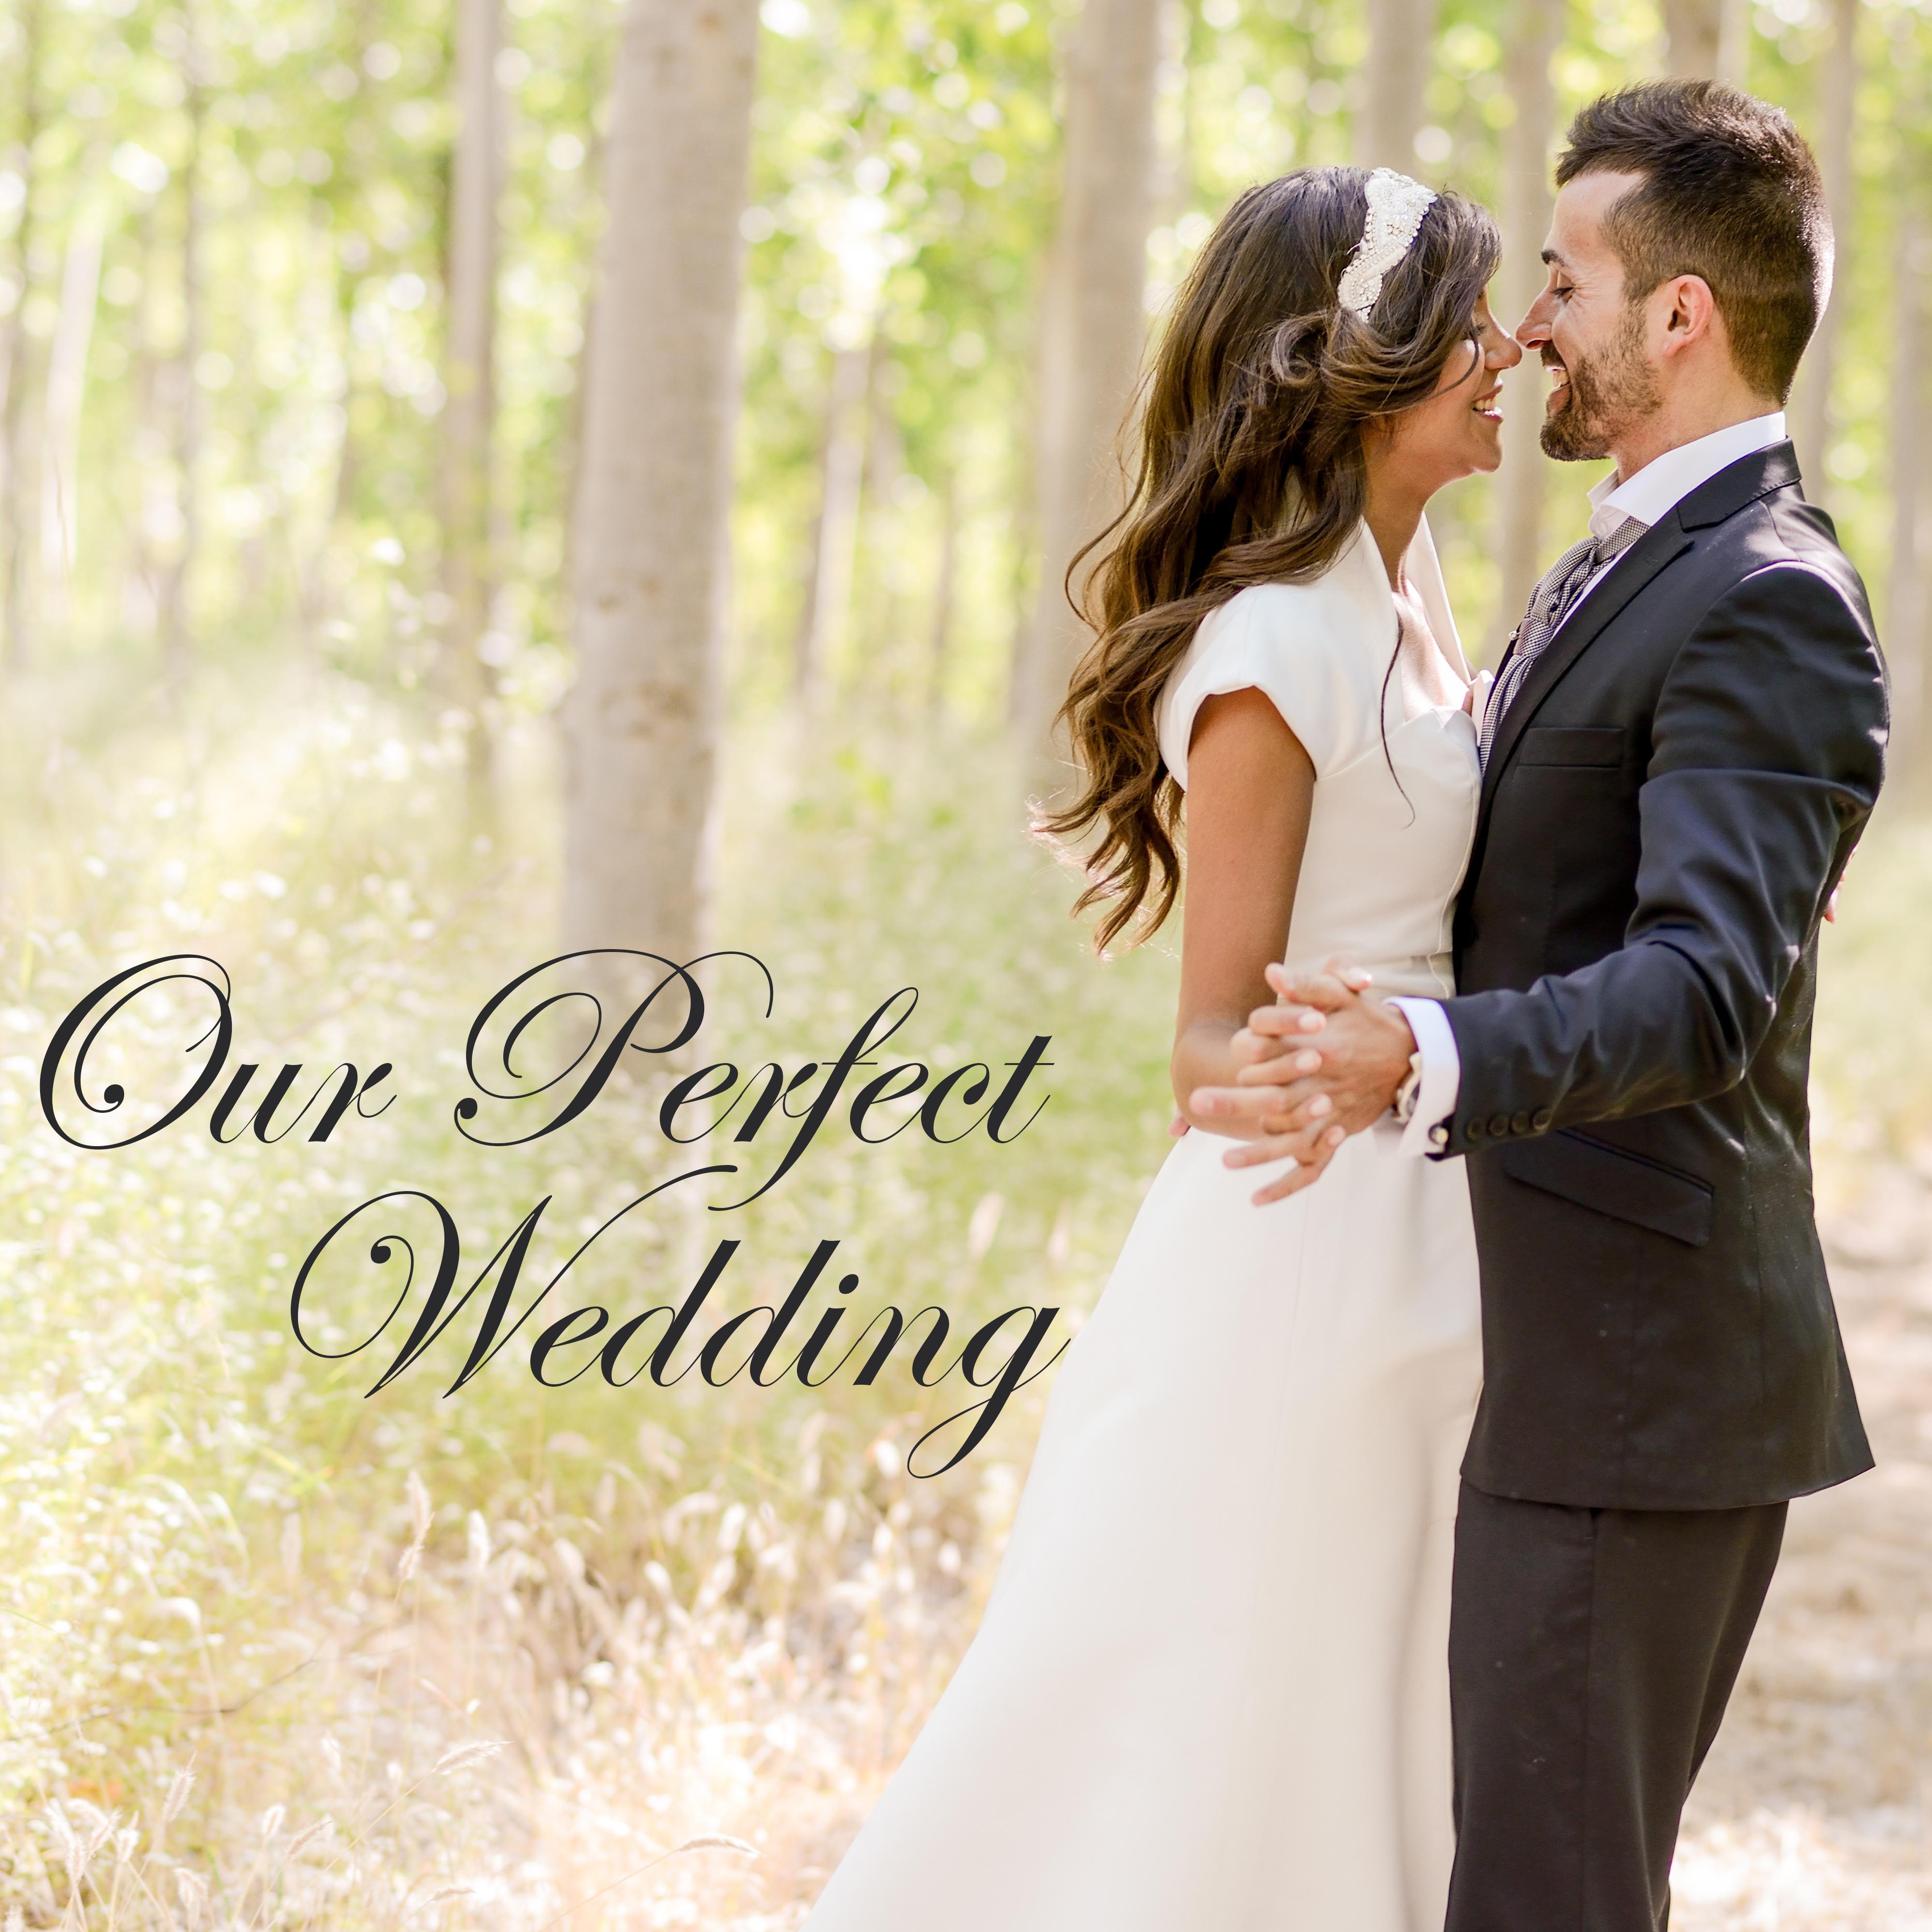 Our Perfect Wedding  Best Wedding Songs, Instrumental  Classical Music for Wedding, Cocktail Party and First Dance